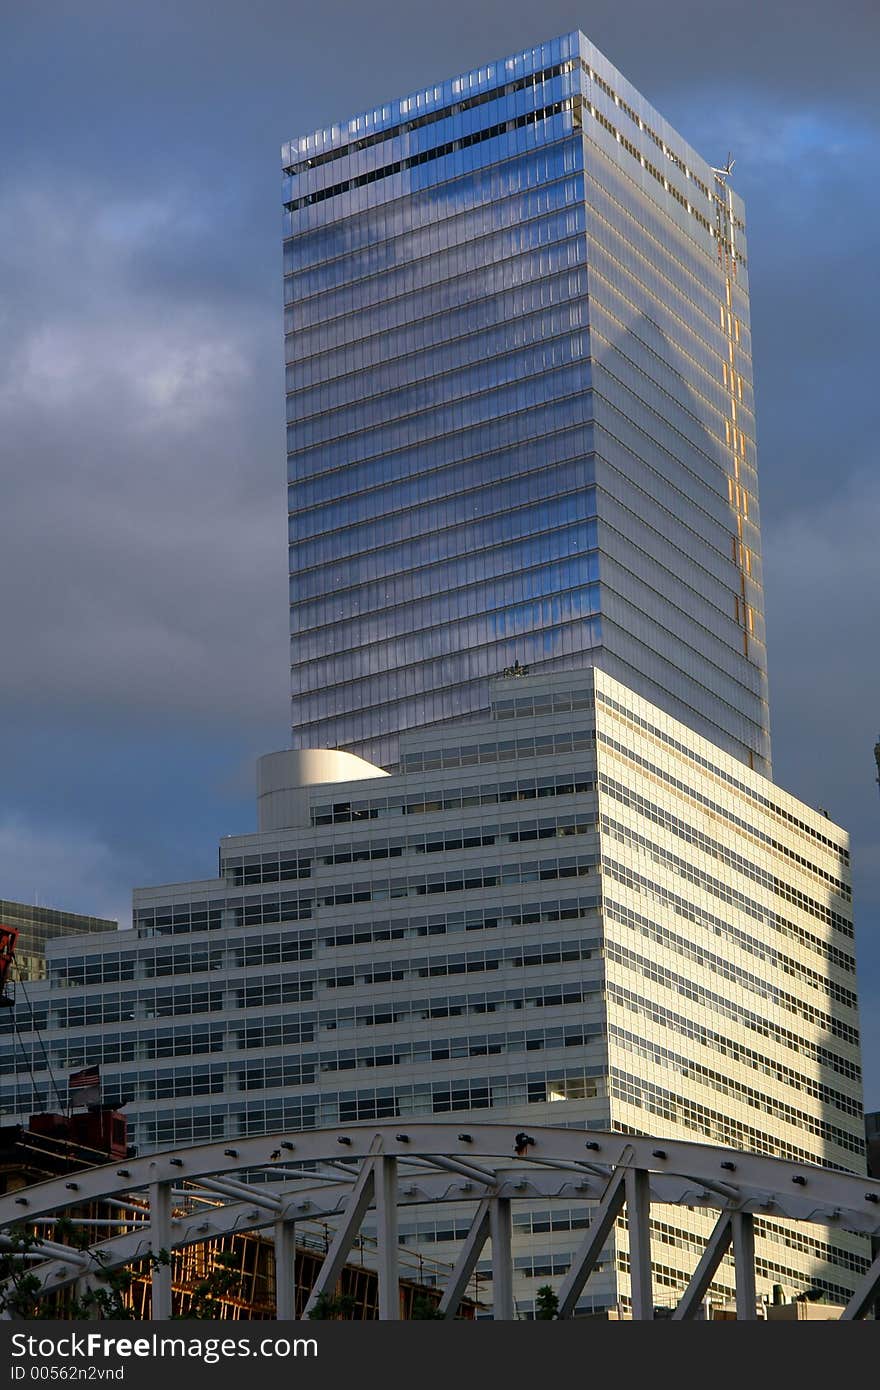 New manhattan office building at dusk - wtc area re-building. New manhattan office building at dusk - wtc area re-building